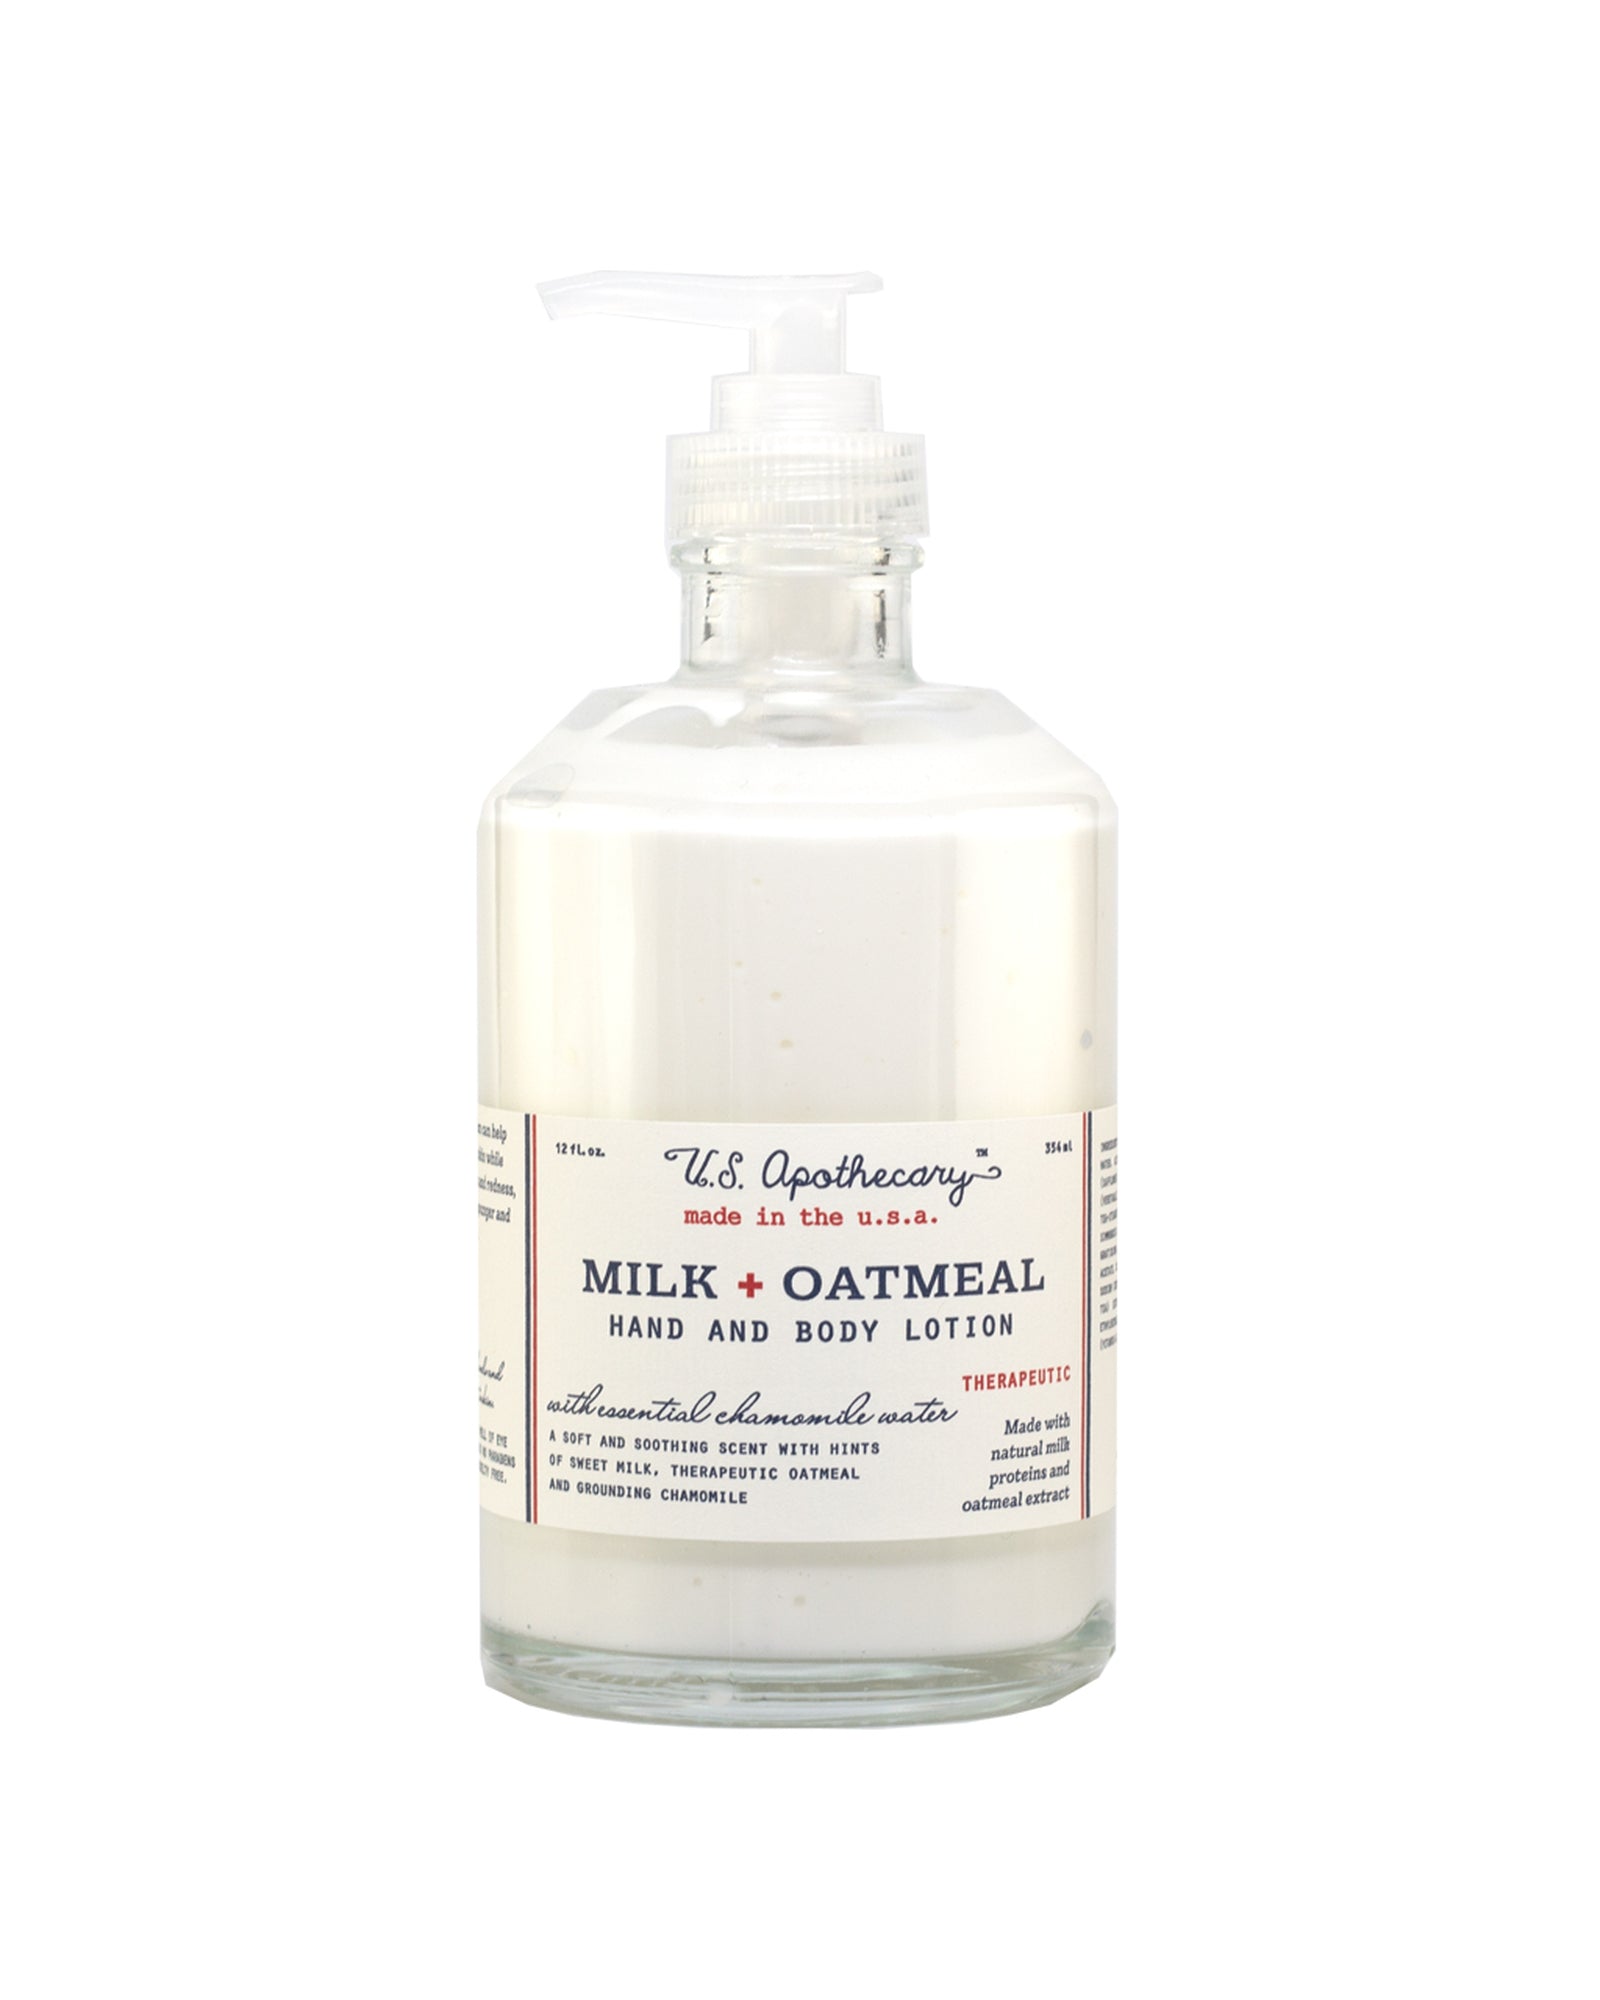 Milk & Oatmeal - 12oz Hand and Body Lotion